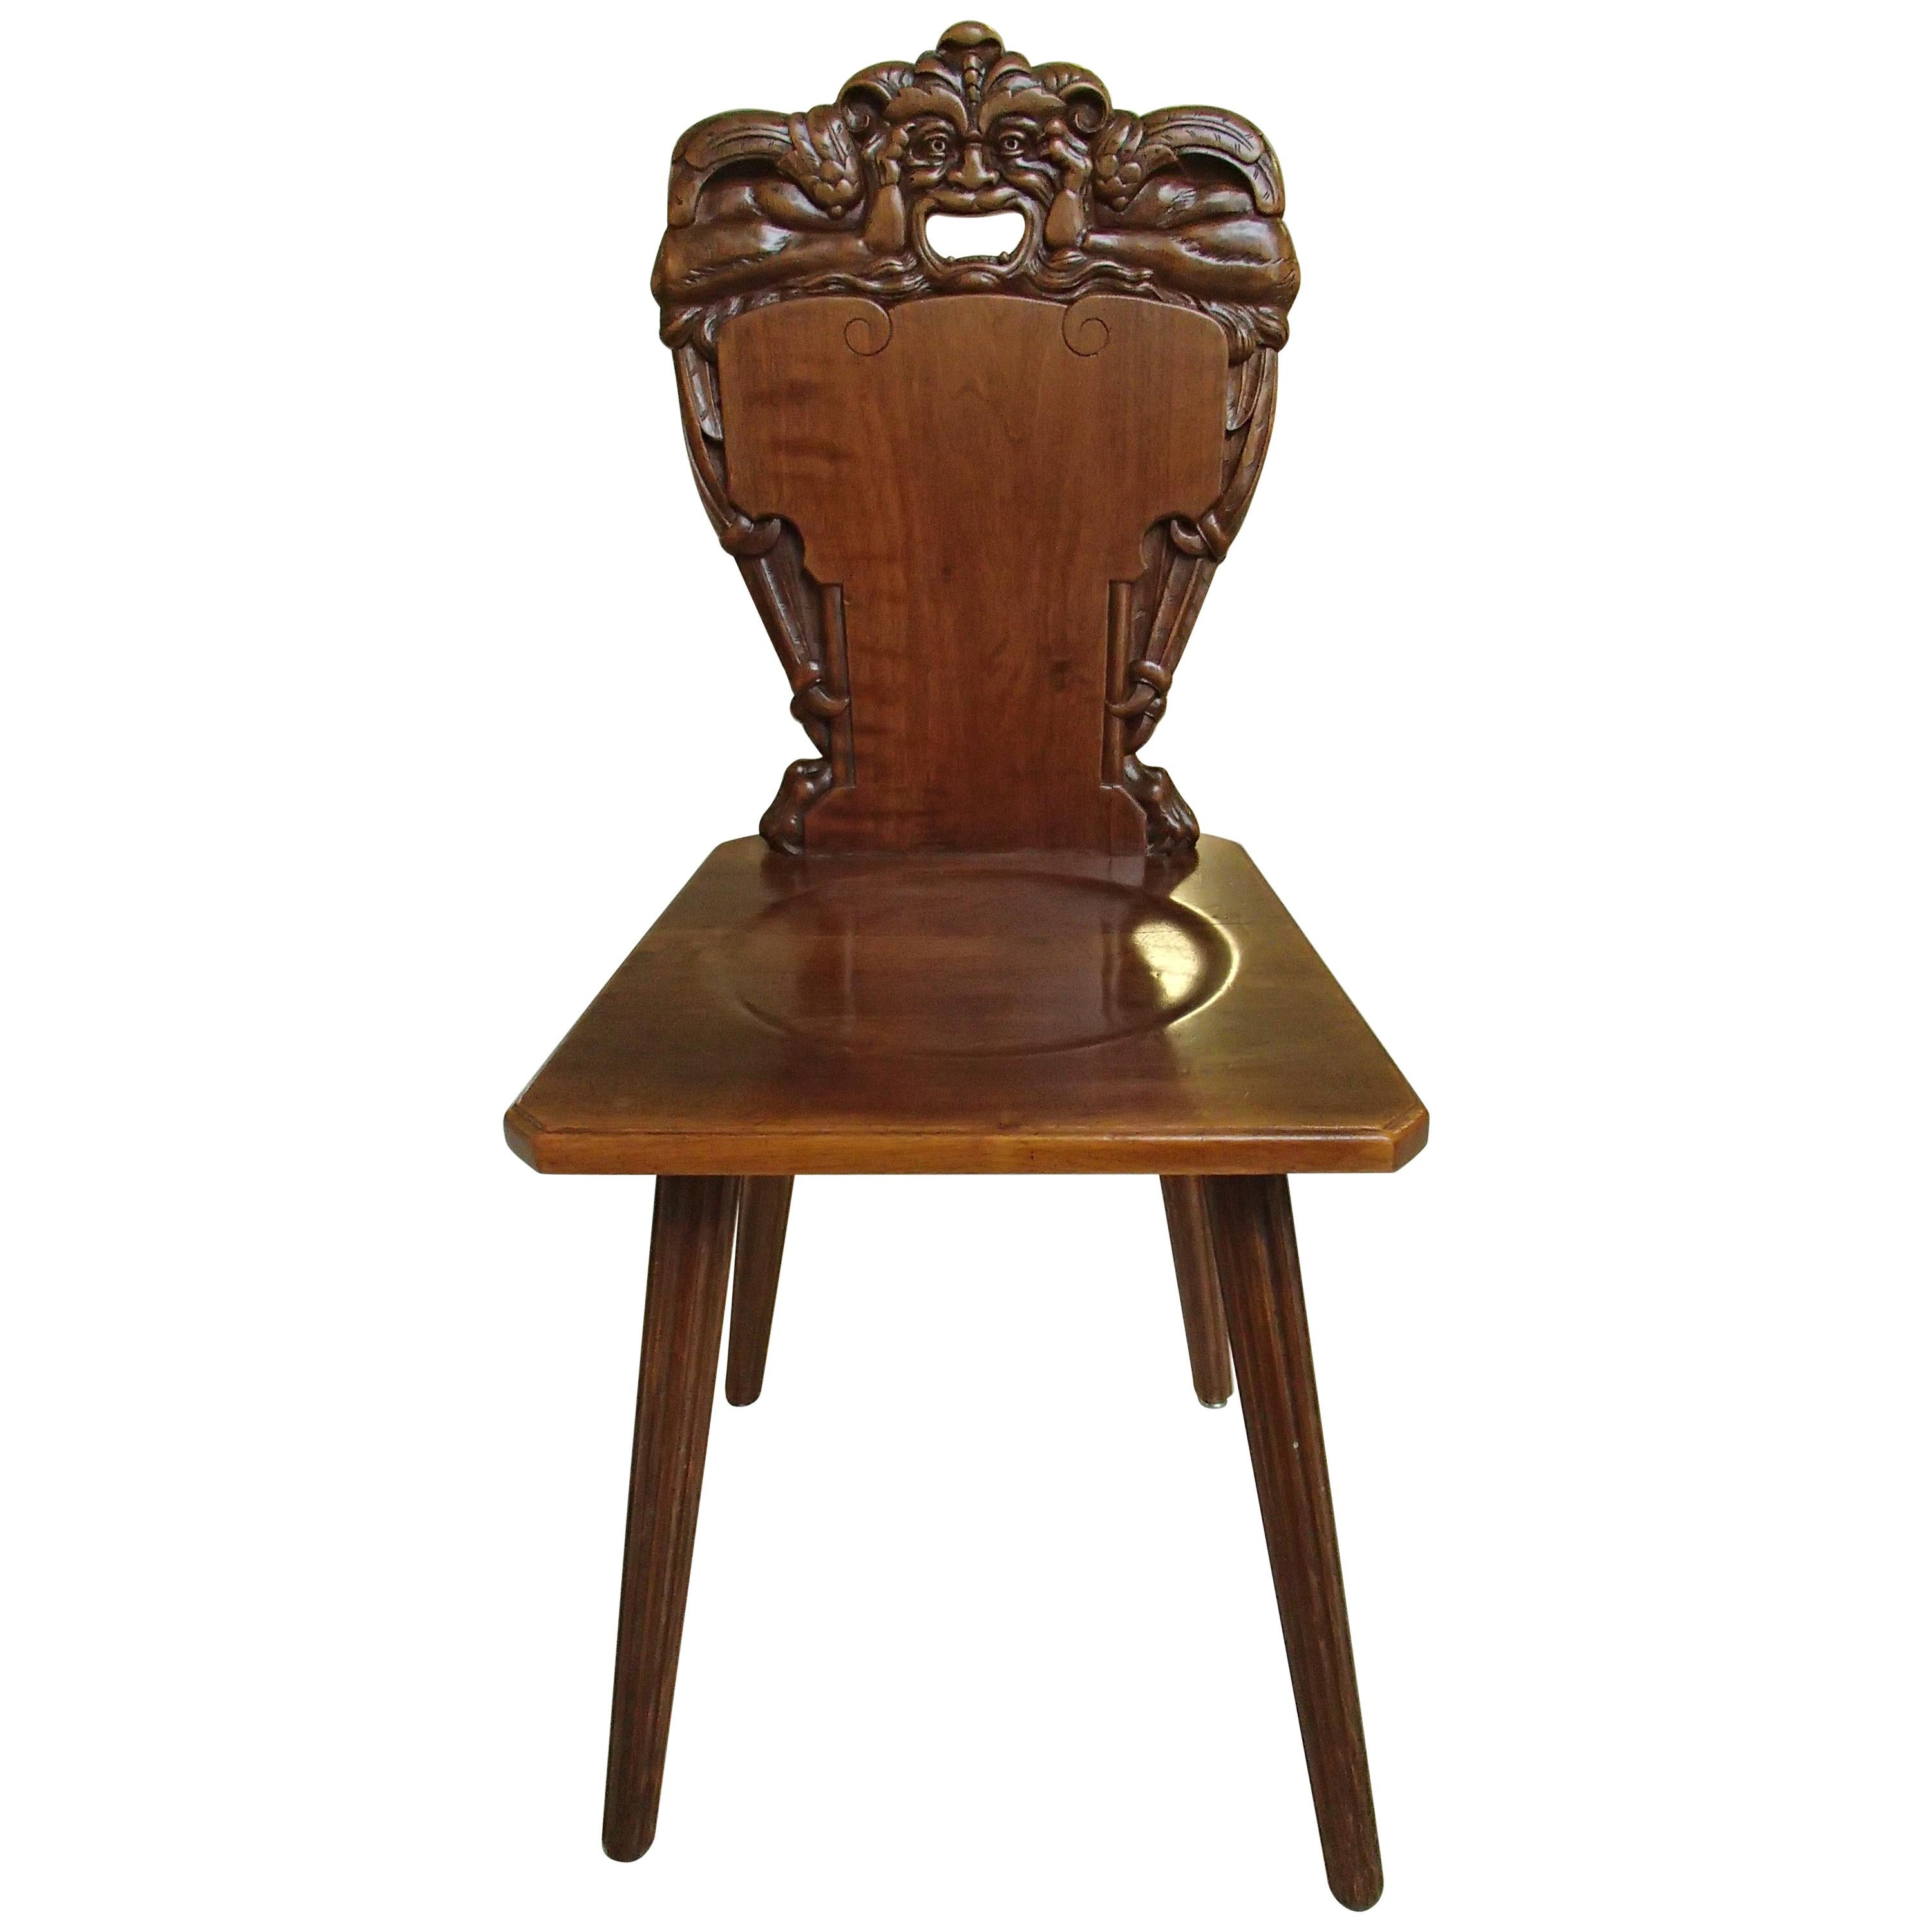 18th Century Brutalist Wooden Chair Carved with Fabulous Creature